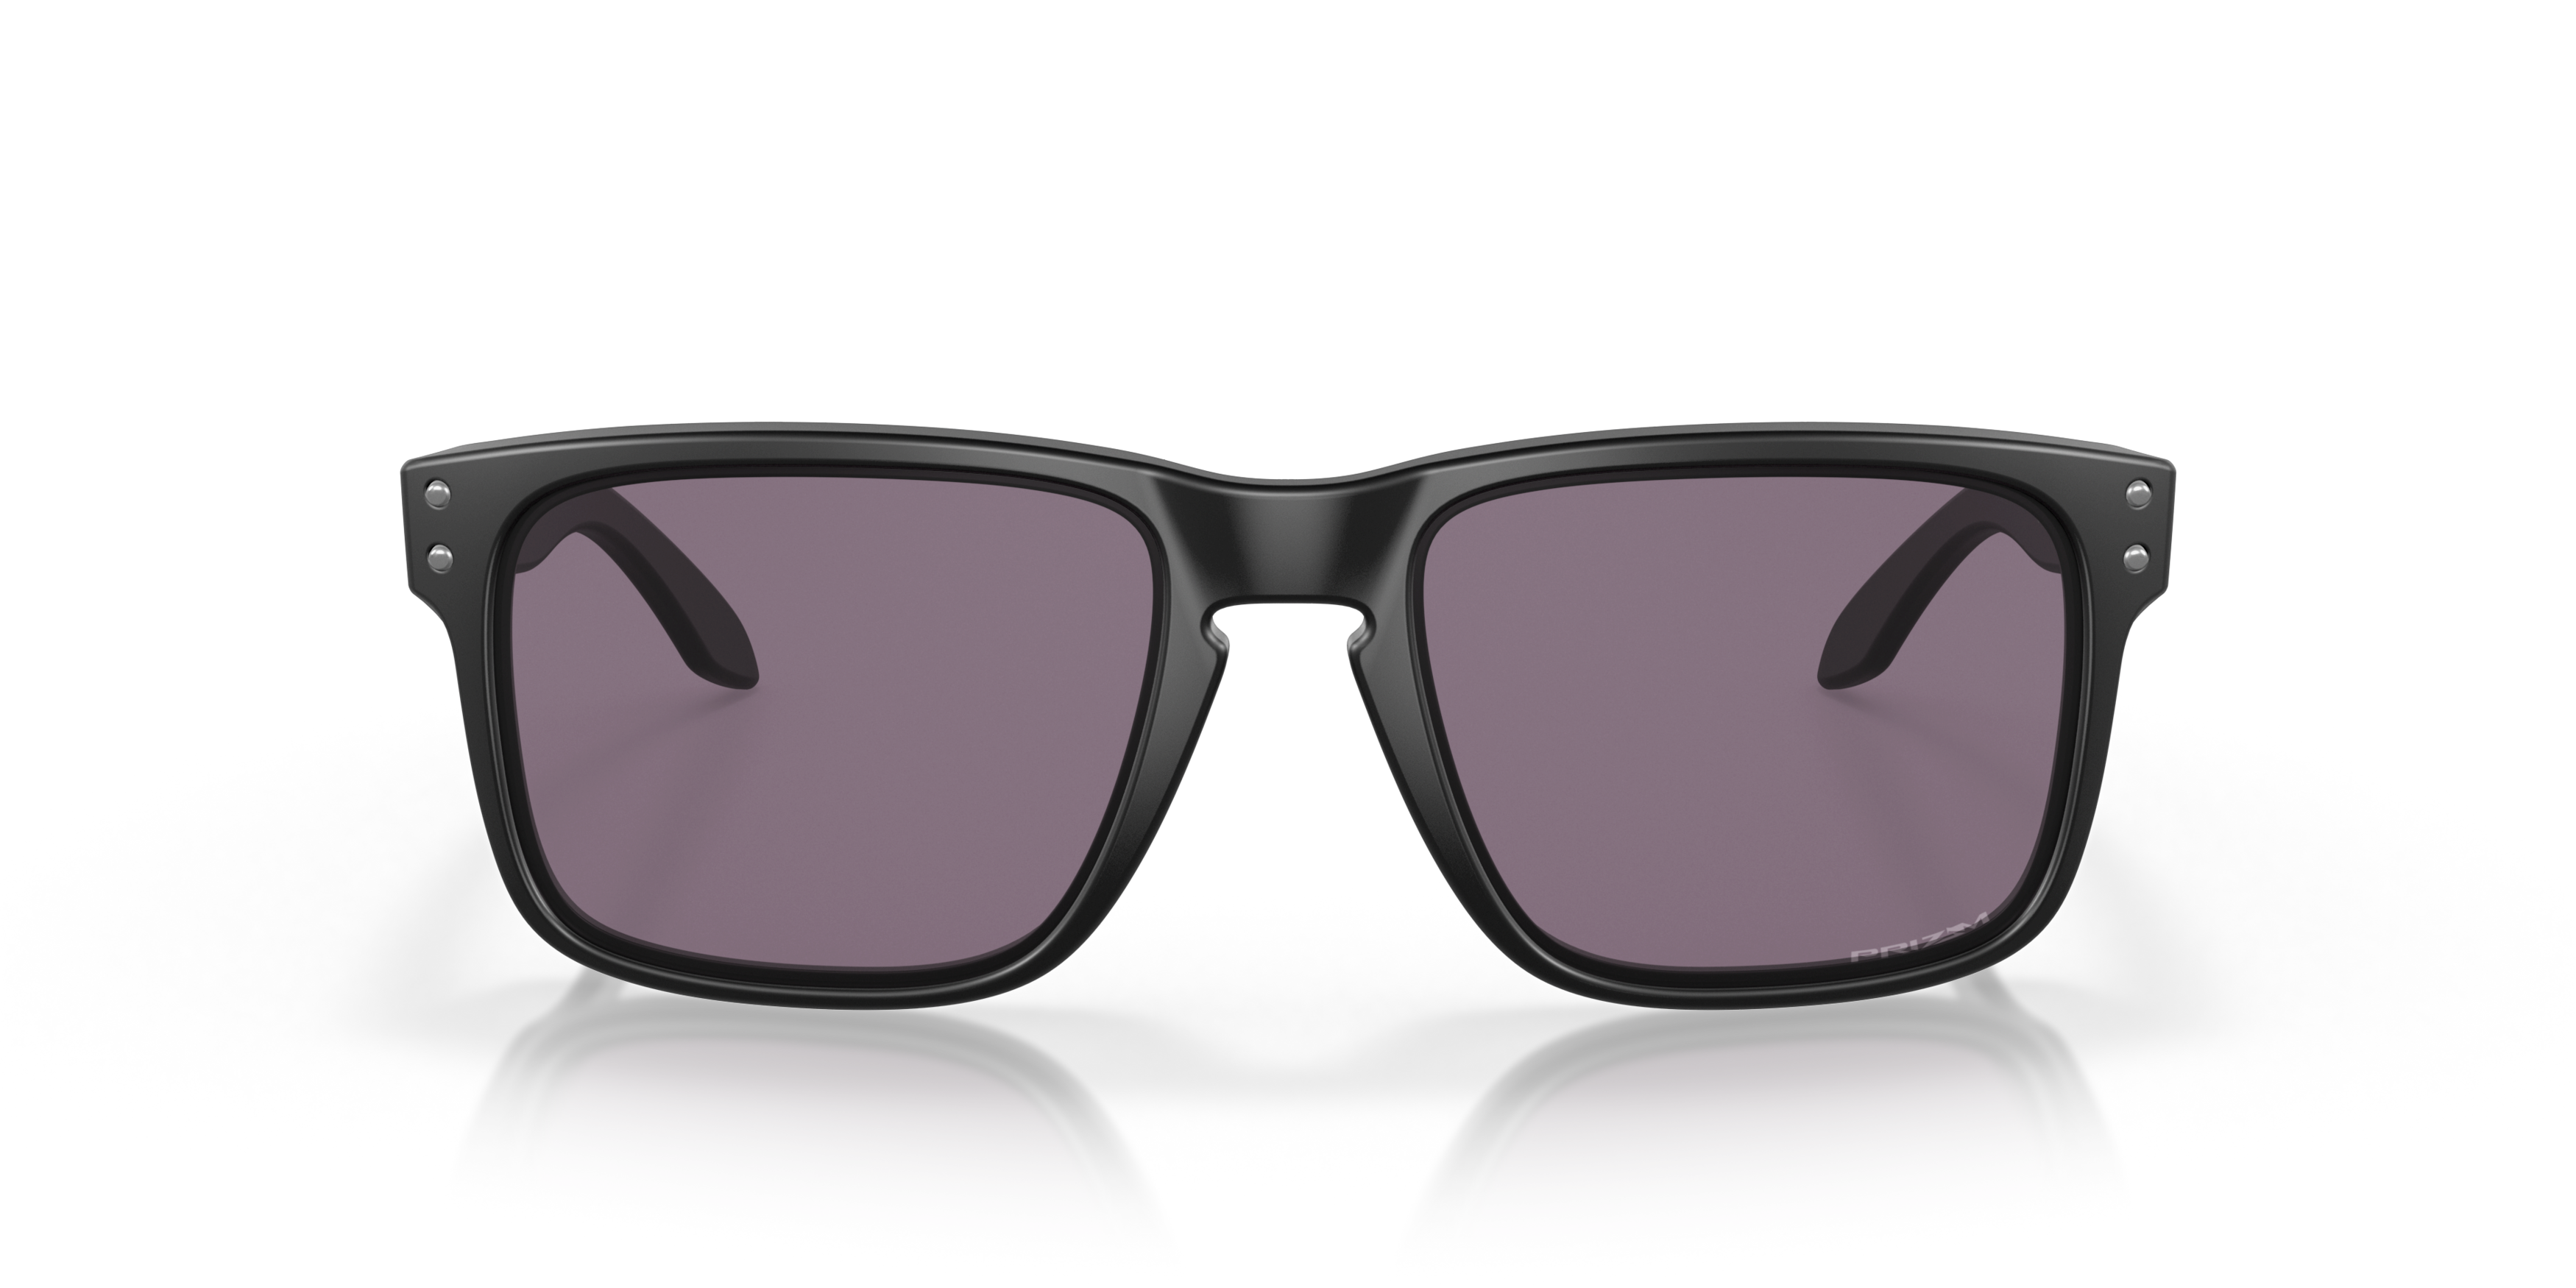 [products.image.front] Oakley 0OO9102 910000000000